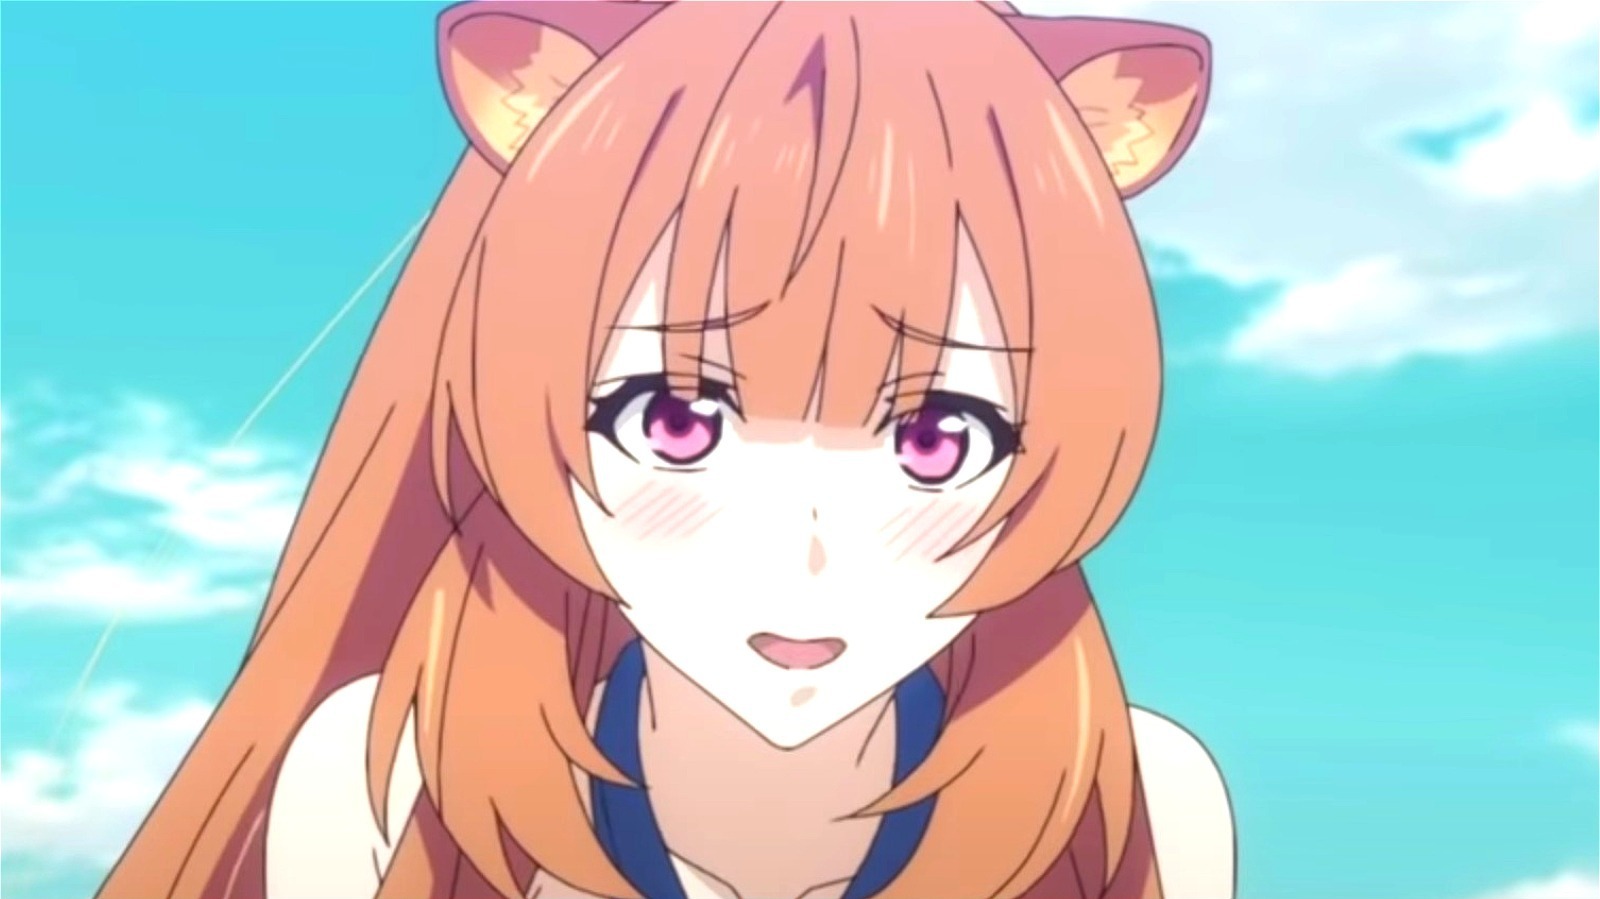 How old is raphtalia from shield hero